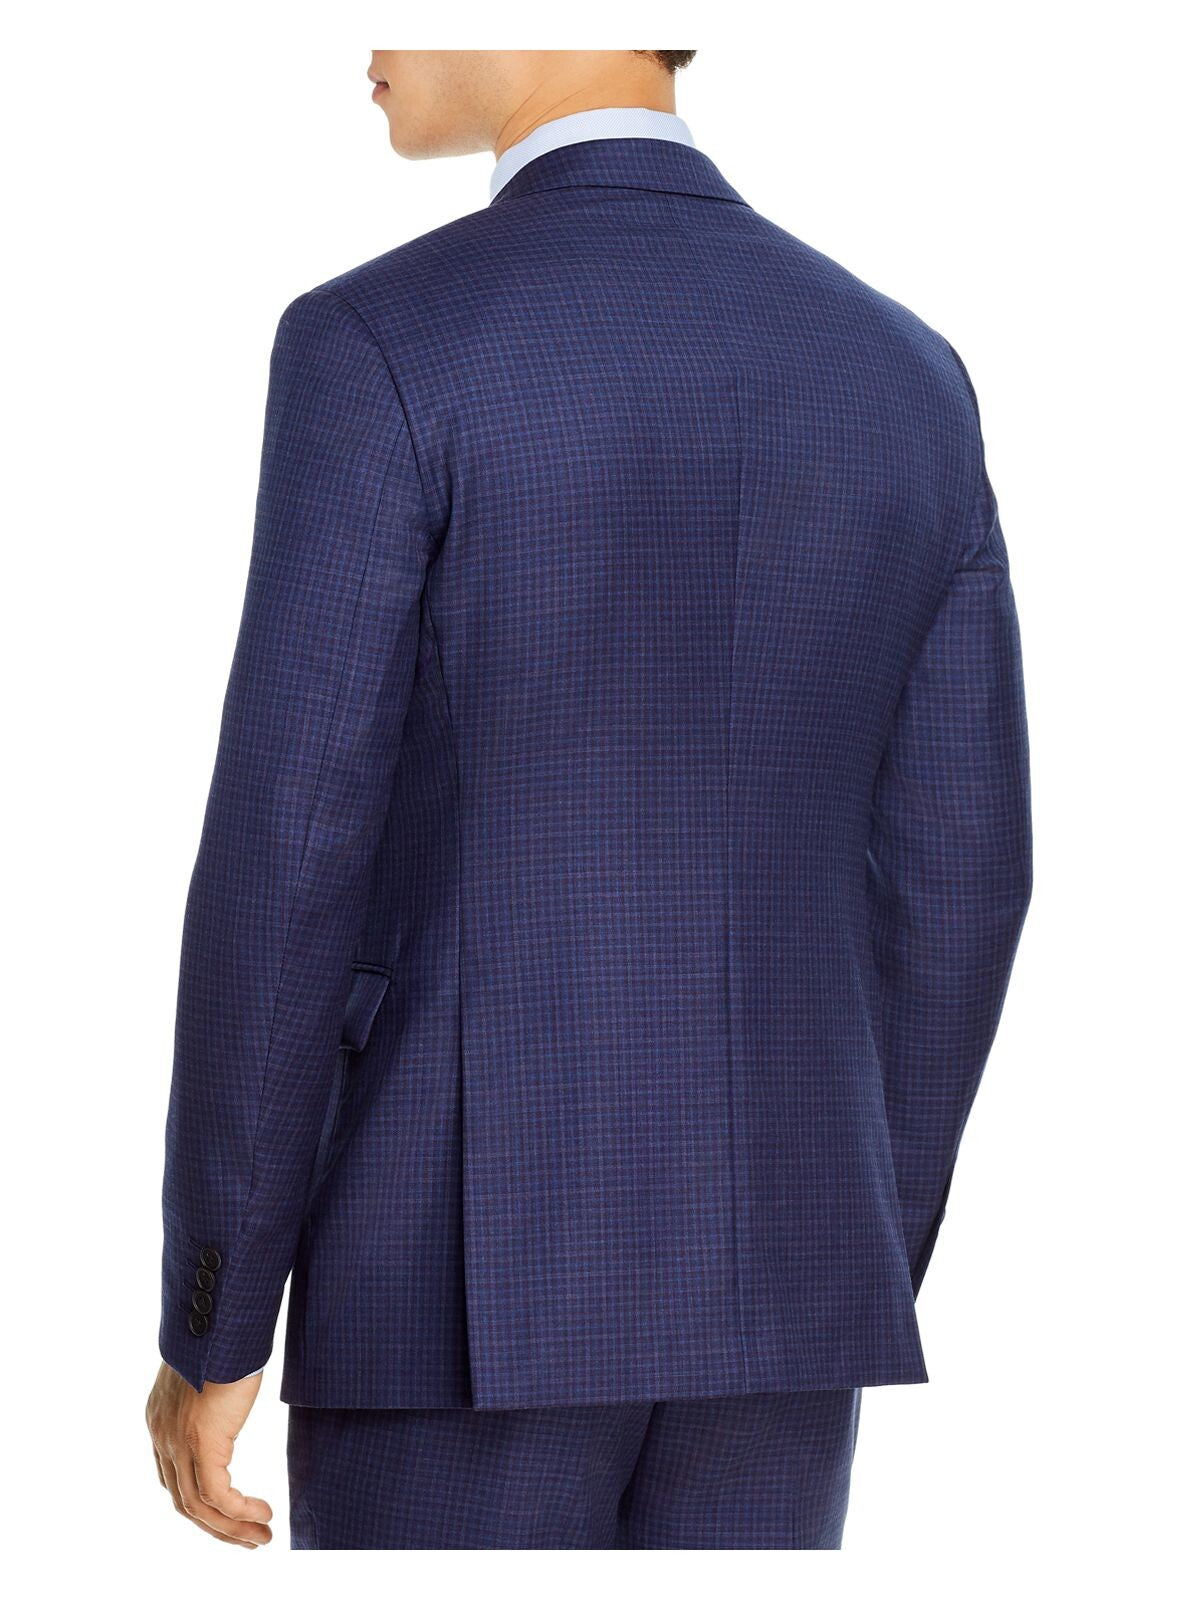 THEORY Mens Bowery Navy Single Breasted, Extra Slim Fit Wool Blend Suit Separate Blazer Jacket 38R